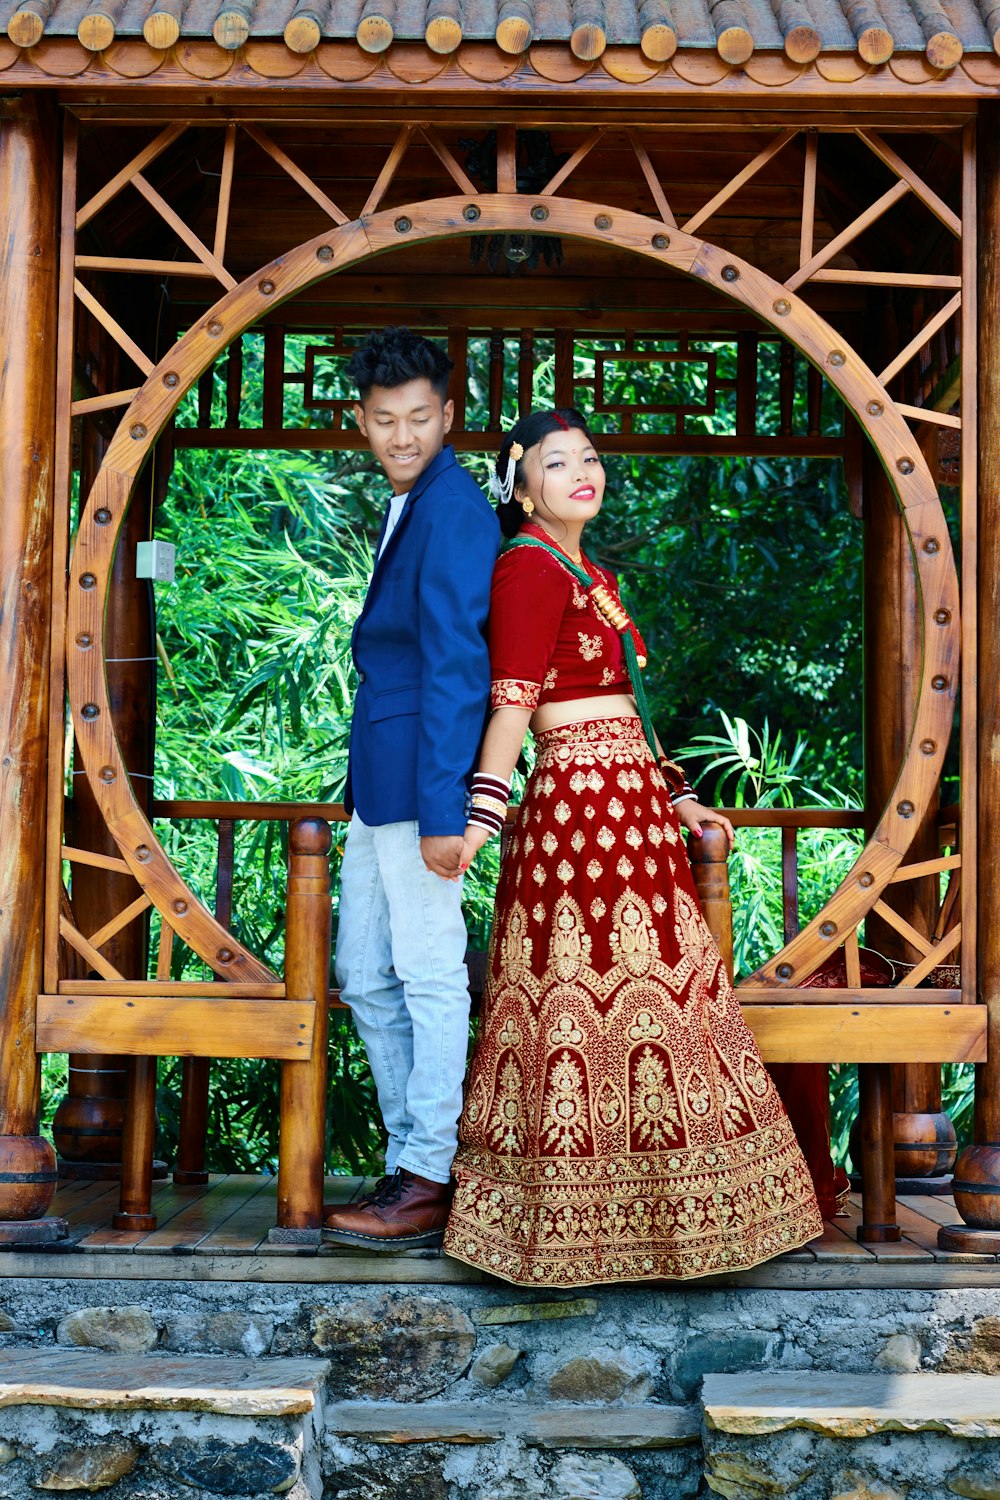 a man and woman standing in front of a wooden structure